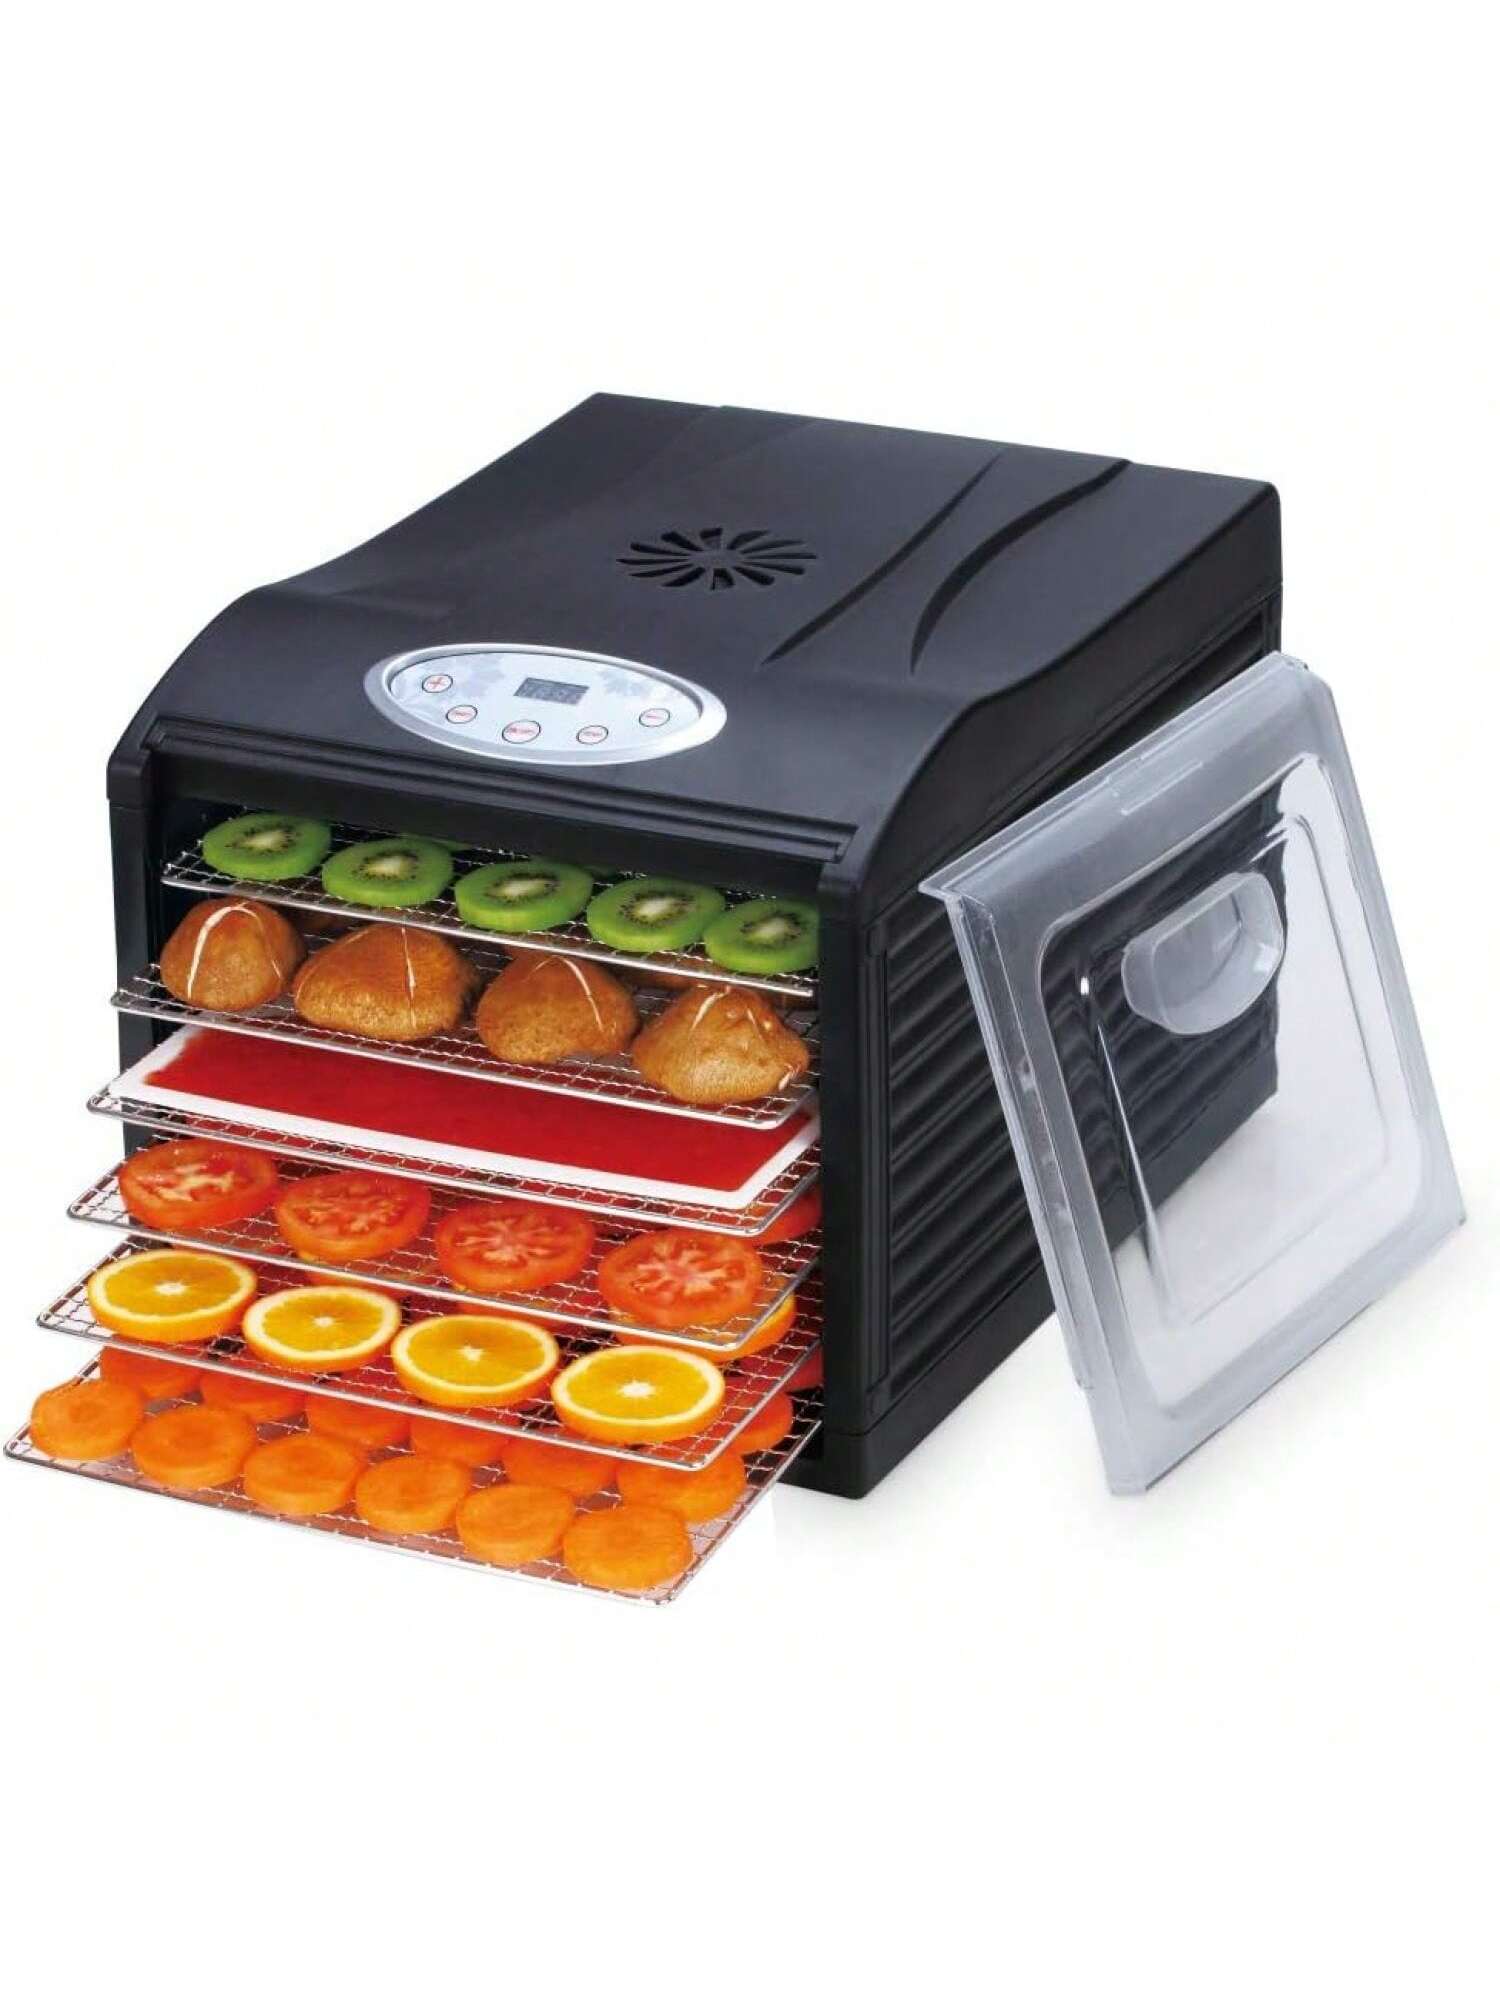 "Silent" Dehydrator with 6 STAINLESS STEEL Trays and Digital Timer and Temperature Control for Fruit, Vegetables, Jerky, s, Dog Treats, Fruit Leathers and More-Multicolor-1